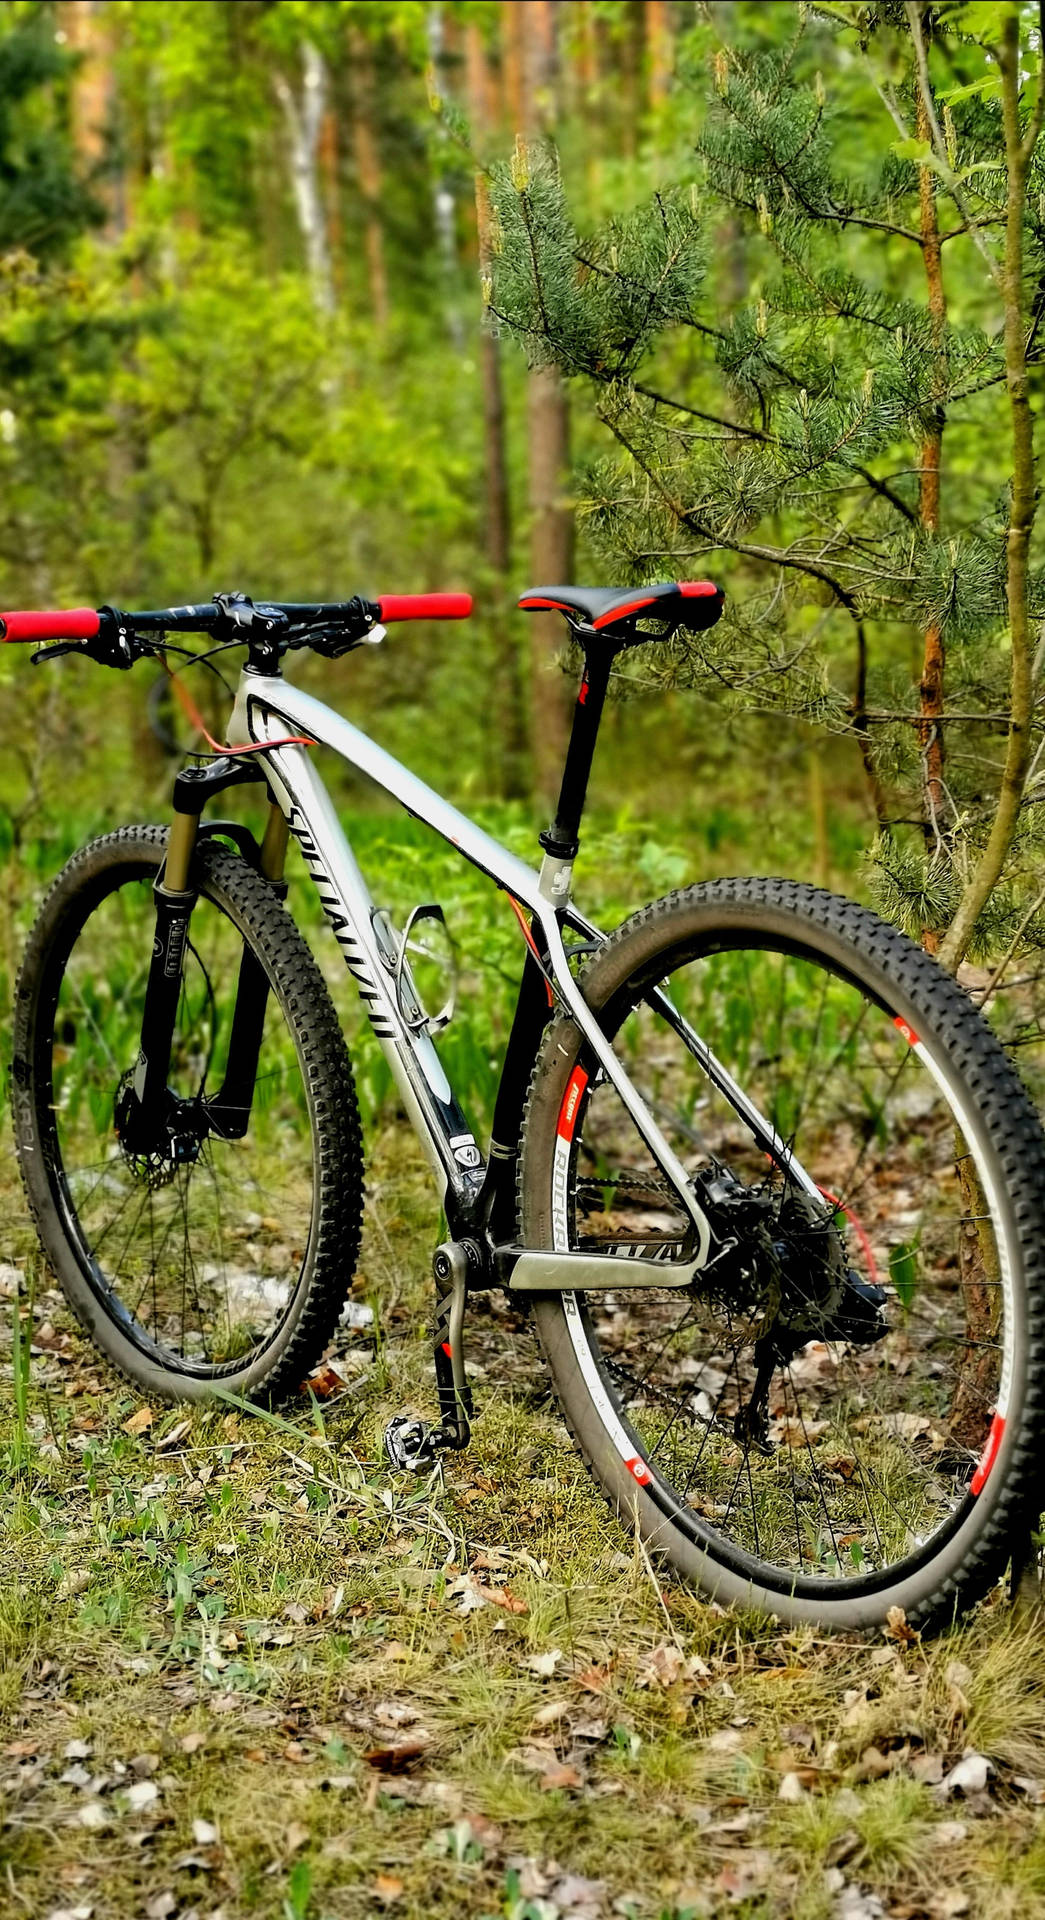 Mountain Bike 1986X3648 Wallpaper and Background Image